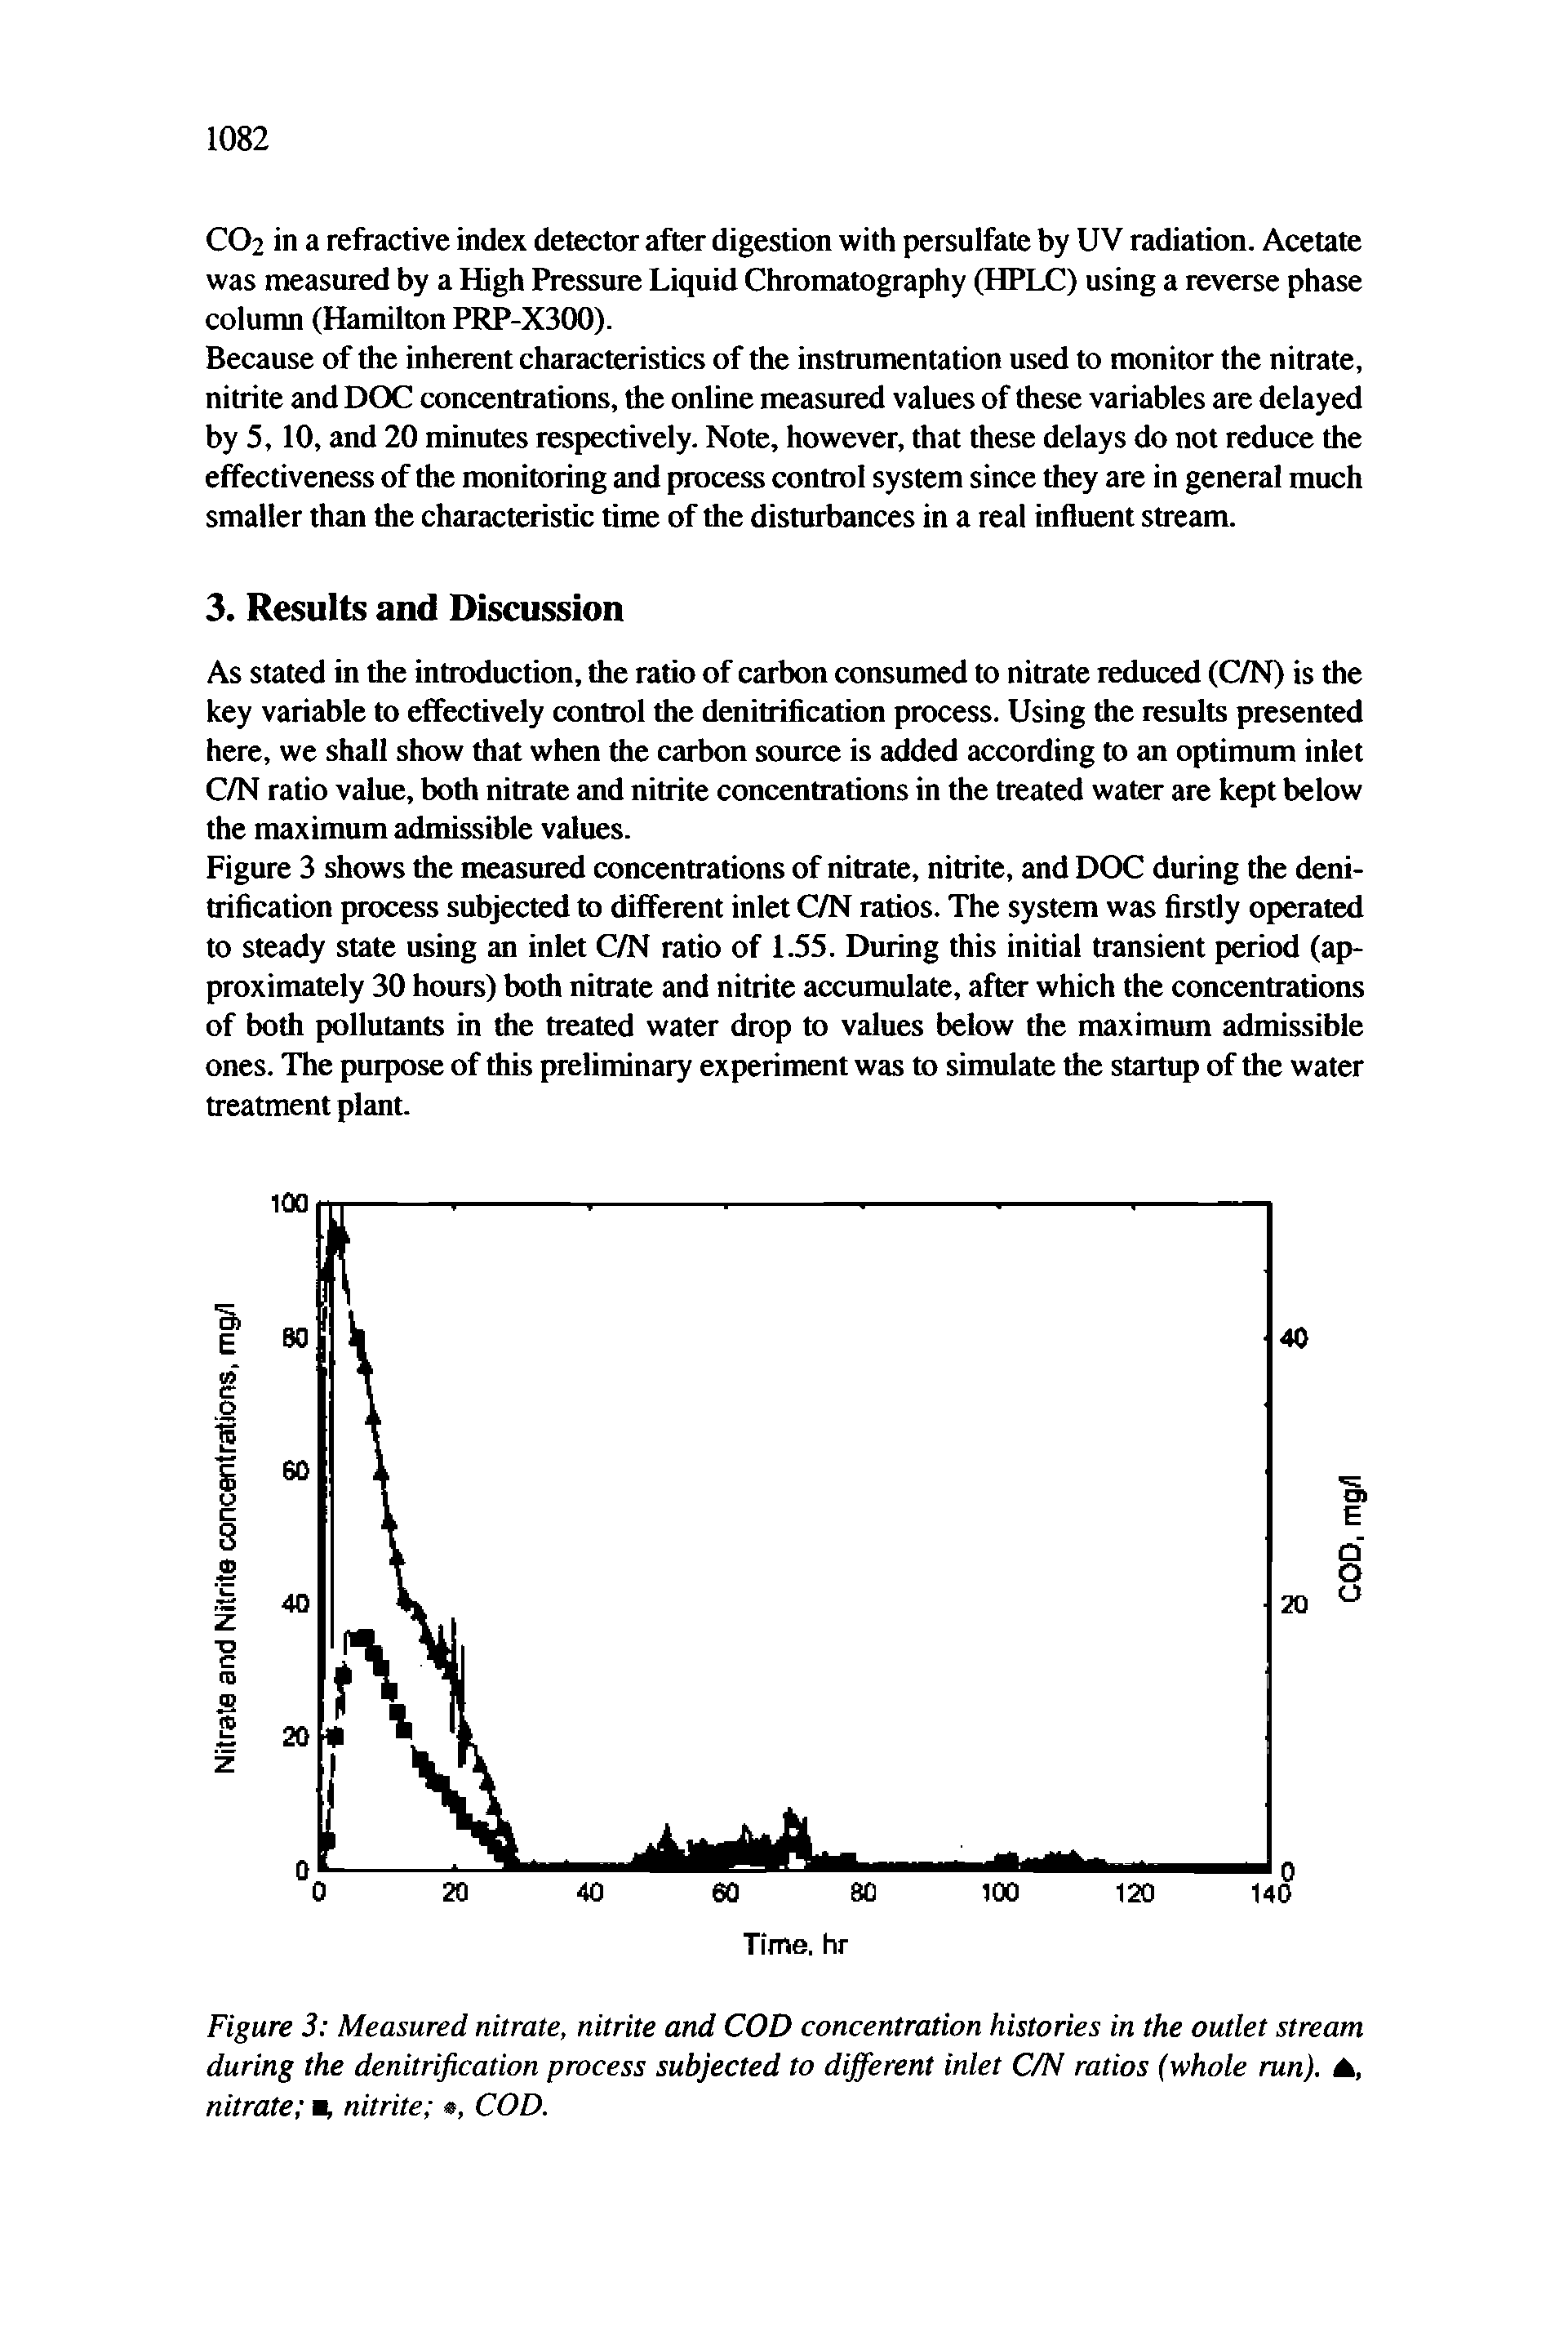 Figure 3 Measured nitrate, nitrite and COD concentration histories in the outlet stream during the denitrification process subjected to different inlet C/N ratios (whole run). A, nitrate m, nitrite , COD.